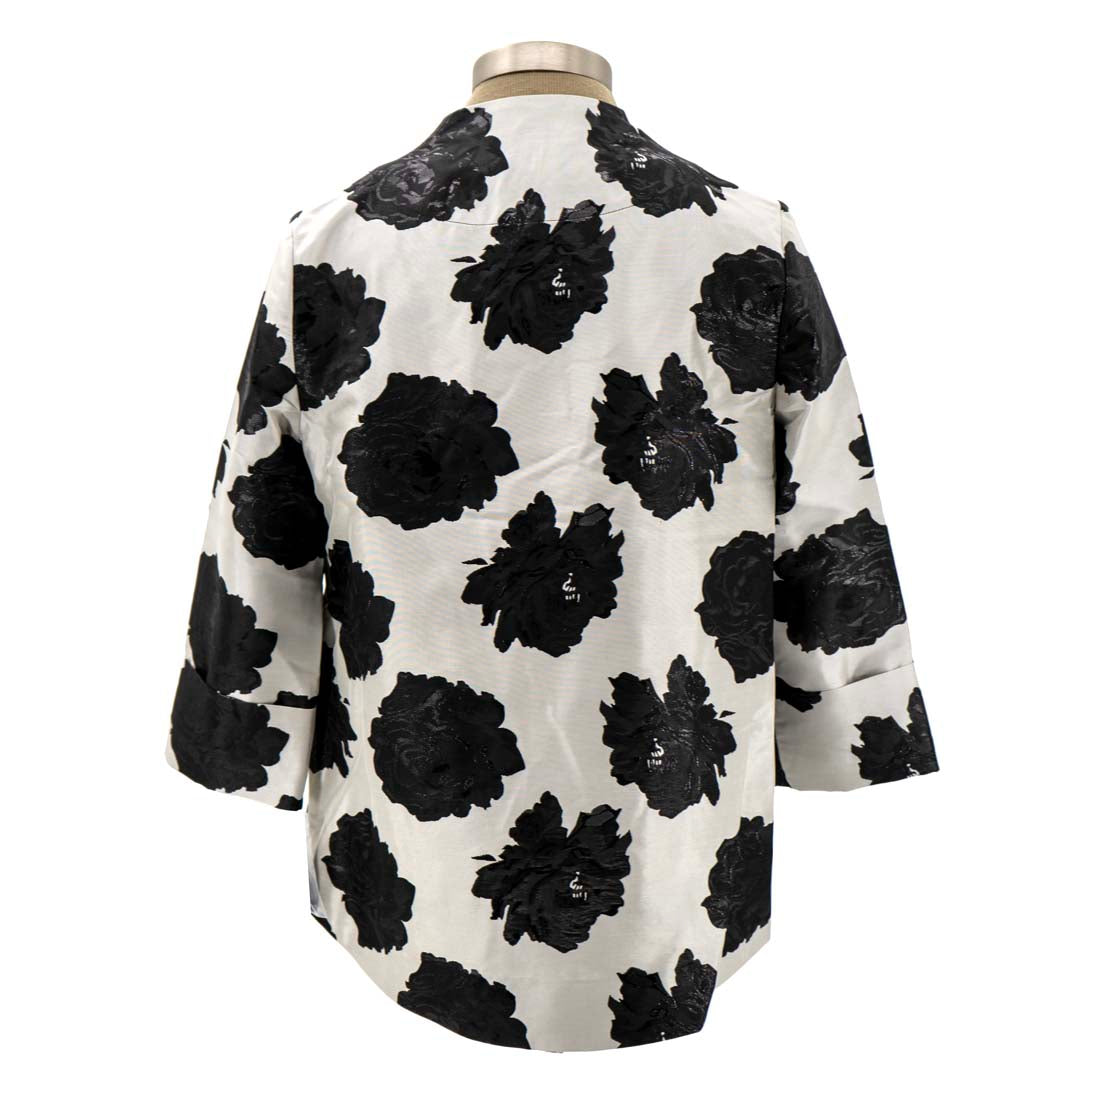 Black Floral One Button Jacket with Detachable Flower